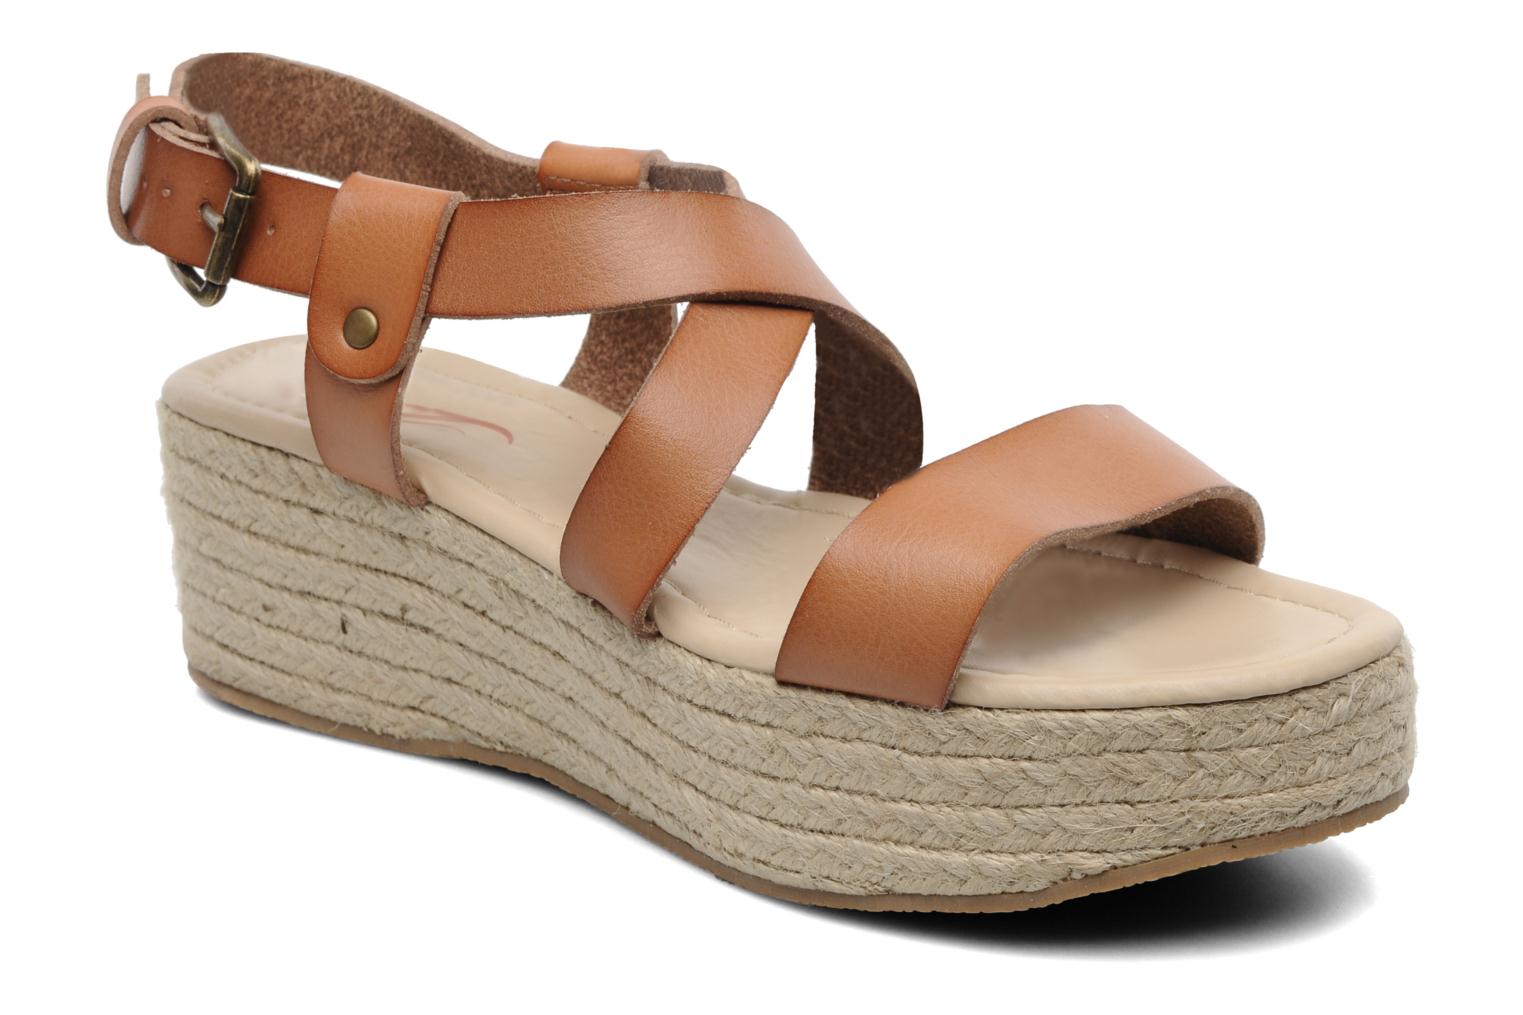 Spot On Graciosa Sandals in Brown at Sarenza.co.uk (90442)